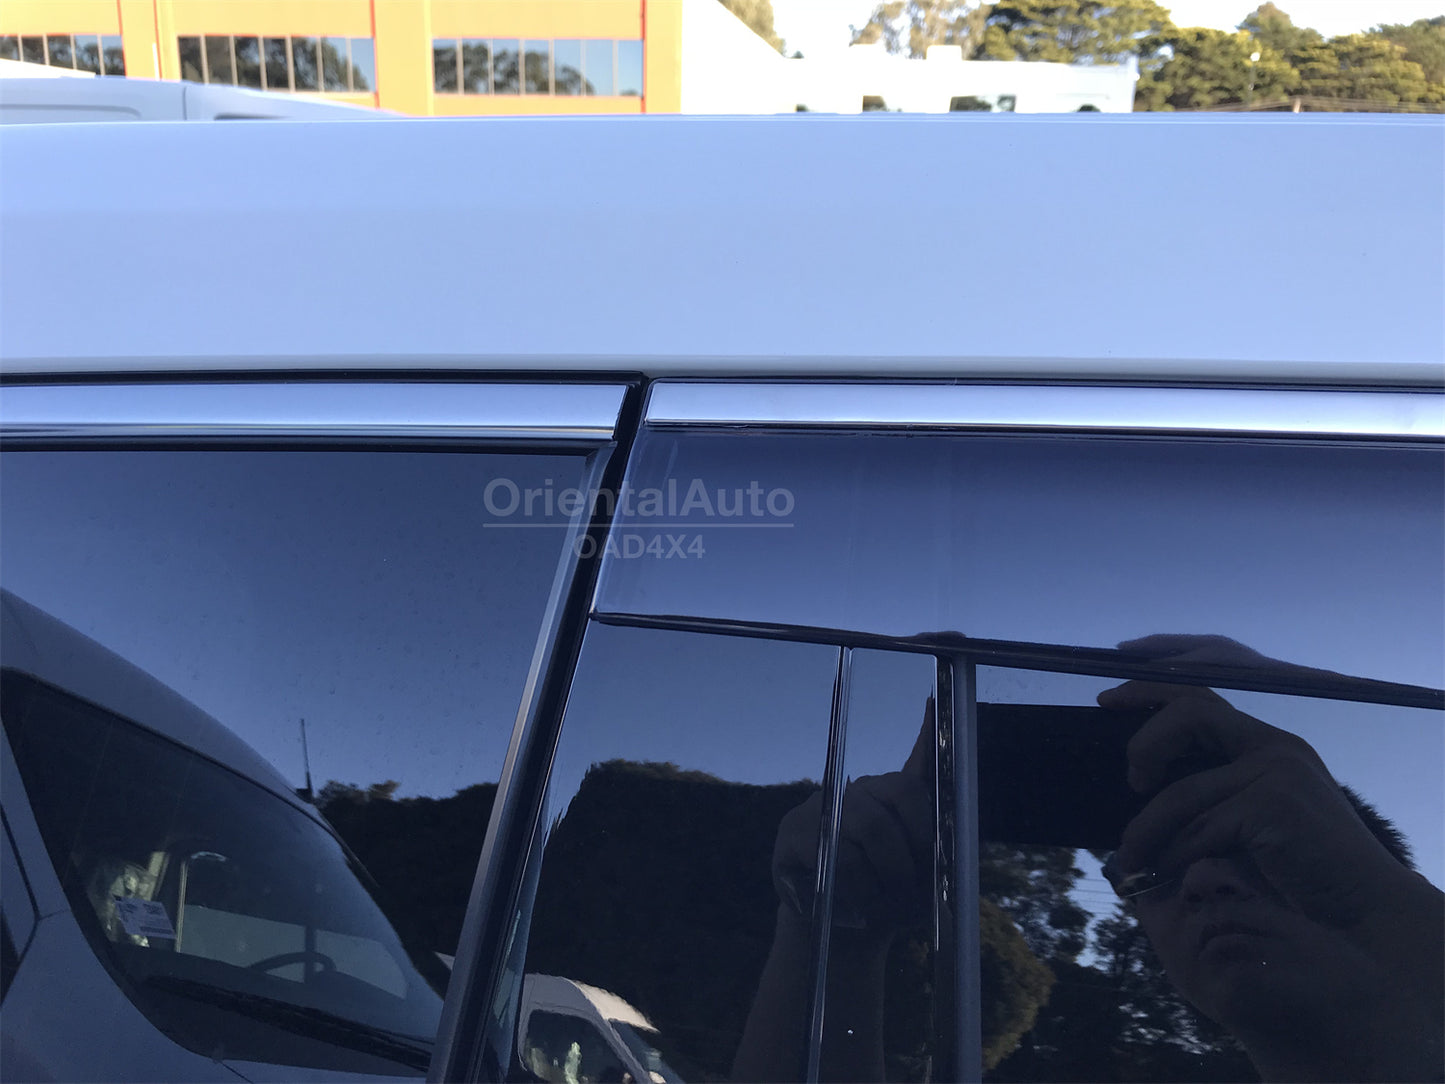 OAD Injection Stainless Weather Shields For Toyota Kluger 2013-2021 Weathershields Window Visors